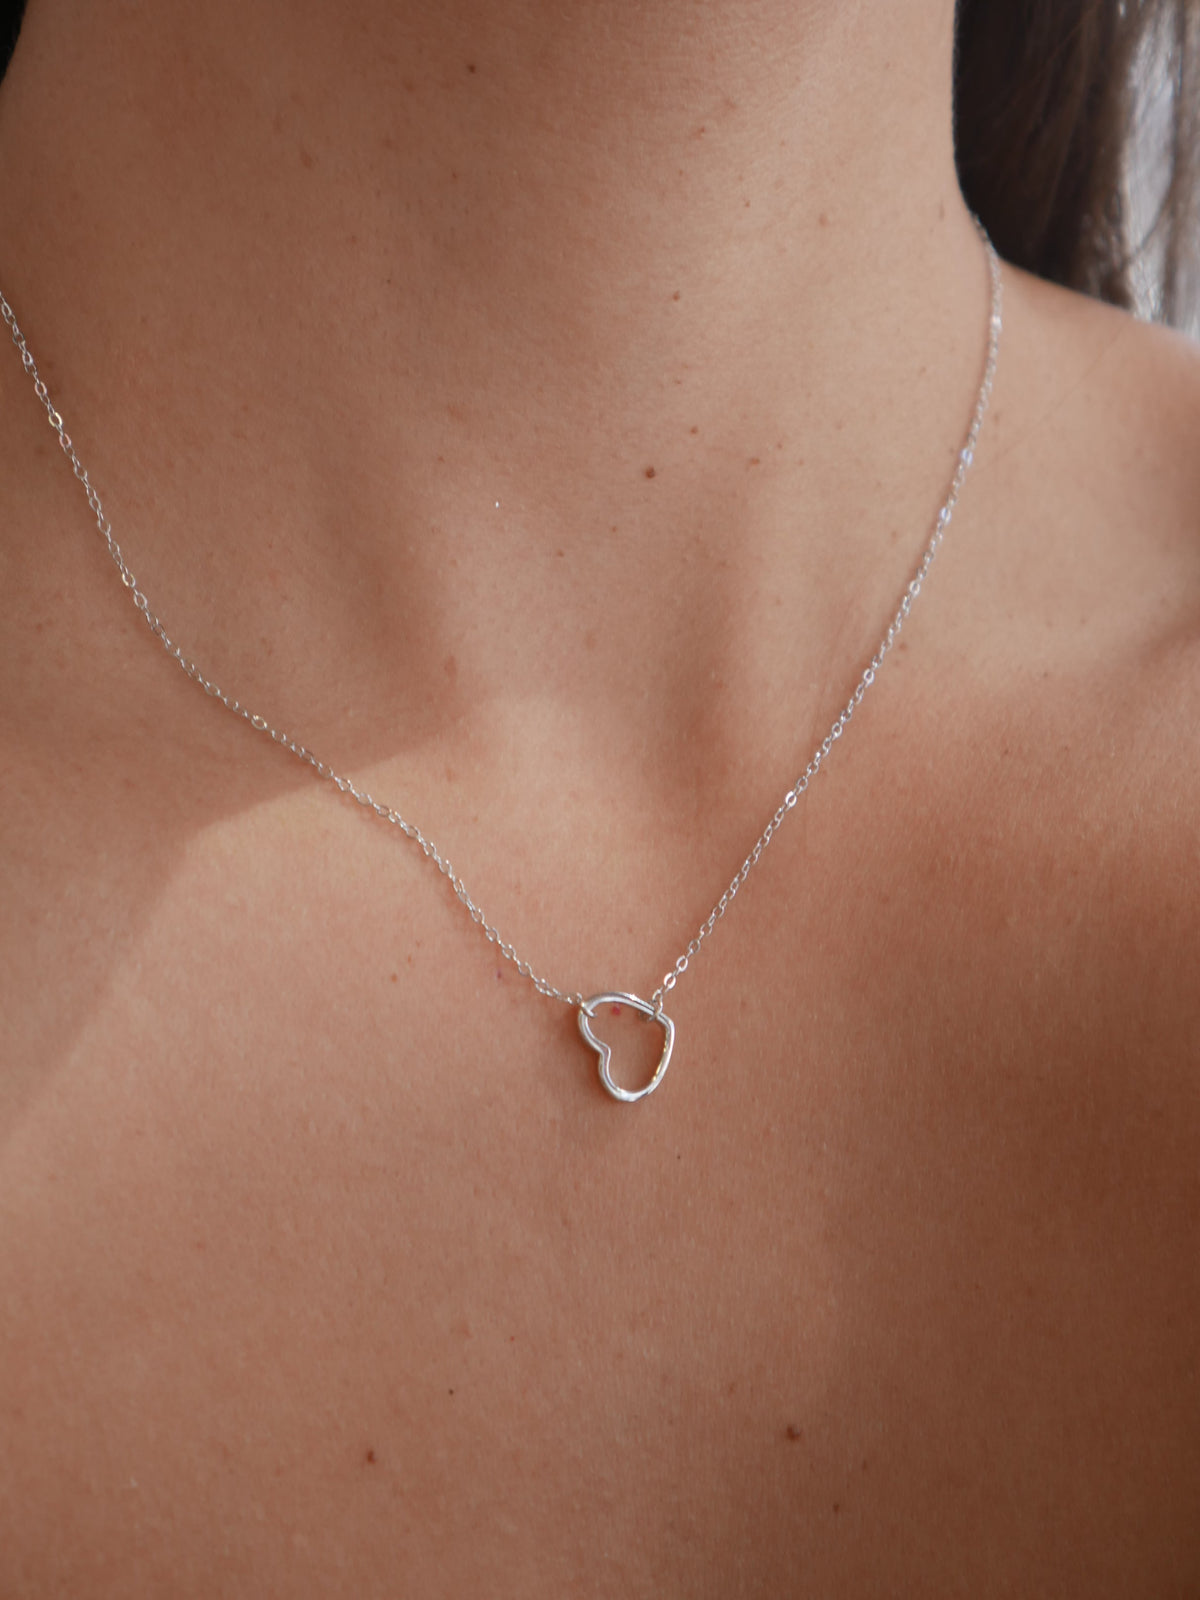 Heart necklaces, sterling silver .925 waterproof hypoallergenic luxury dainty necklaces, popular, unique, valentines, anniversary, love necklaces, dainty heart necklaces